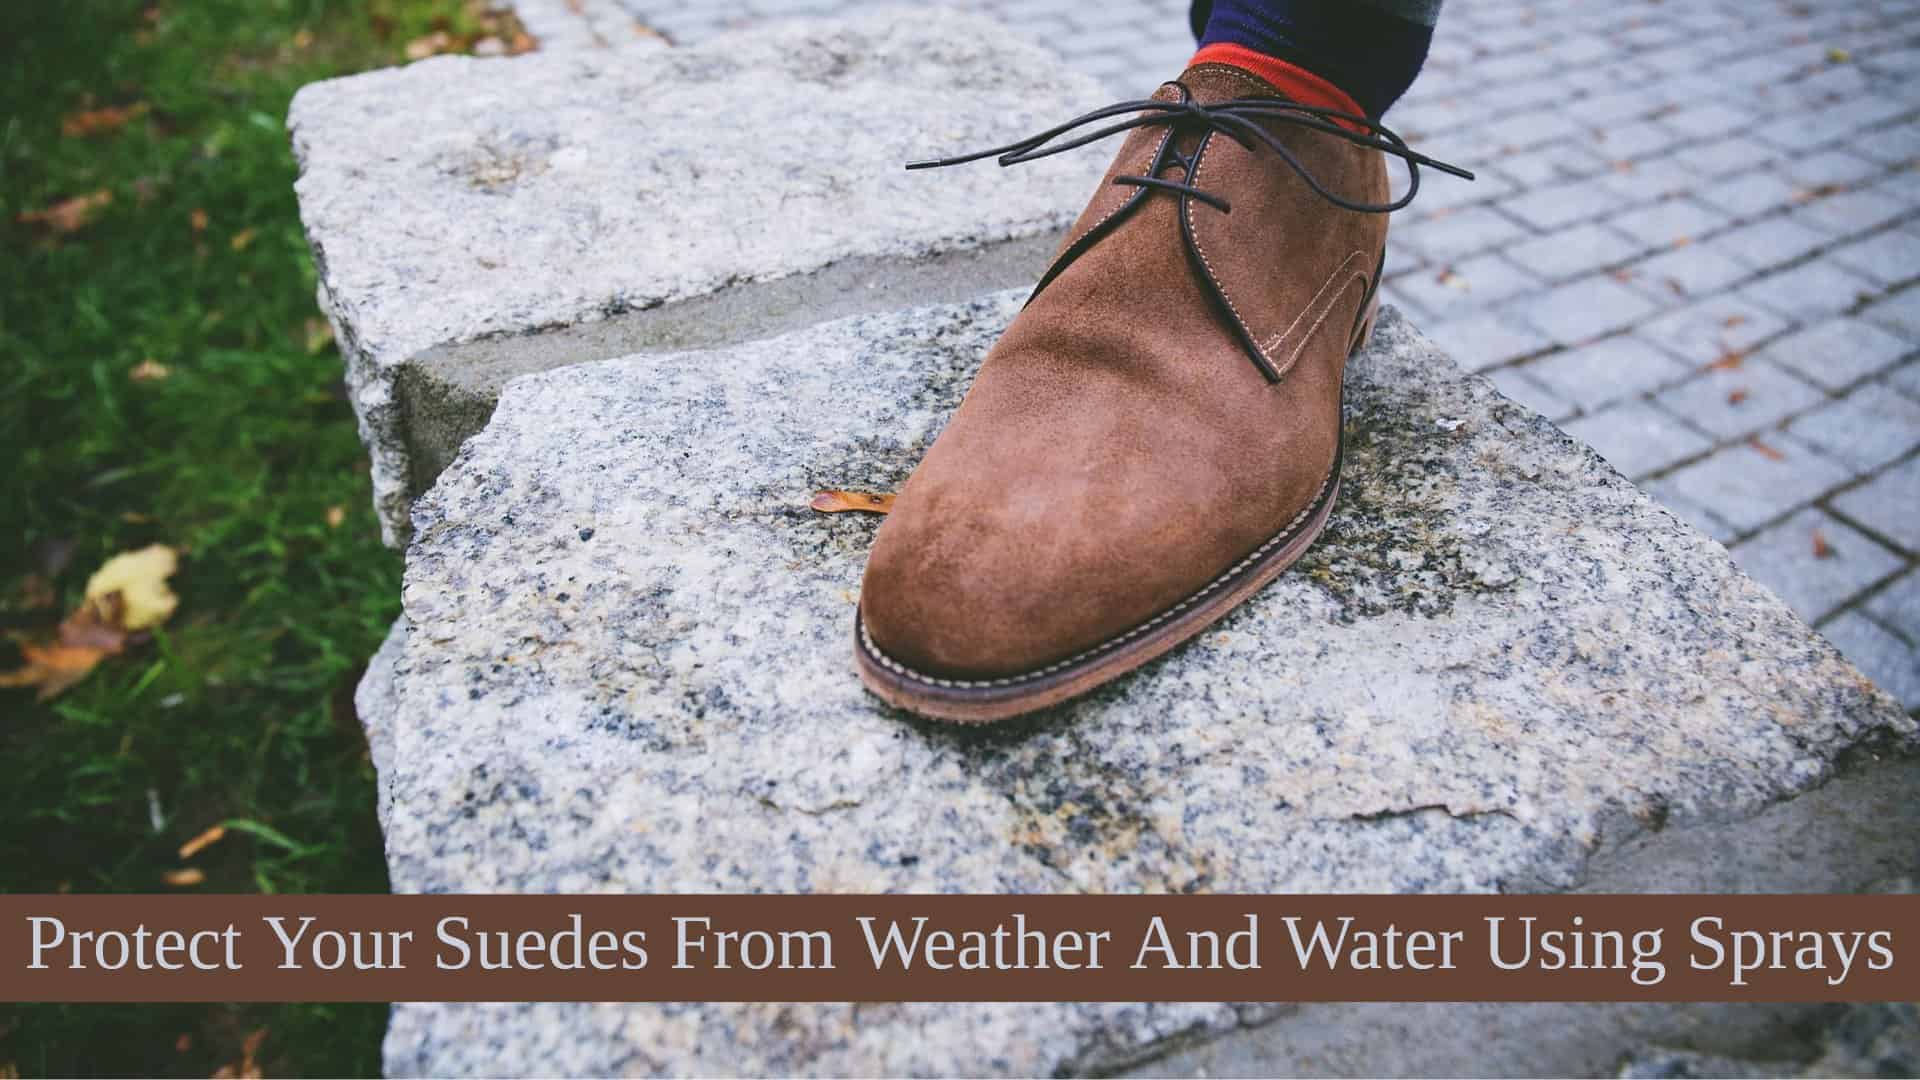 Protect-Suedes-From-Weather-And-Water-Using-Sprays